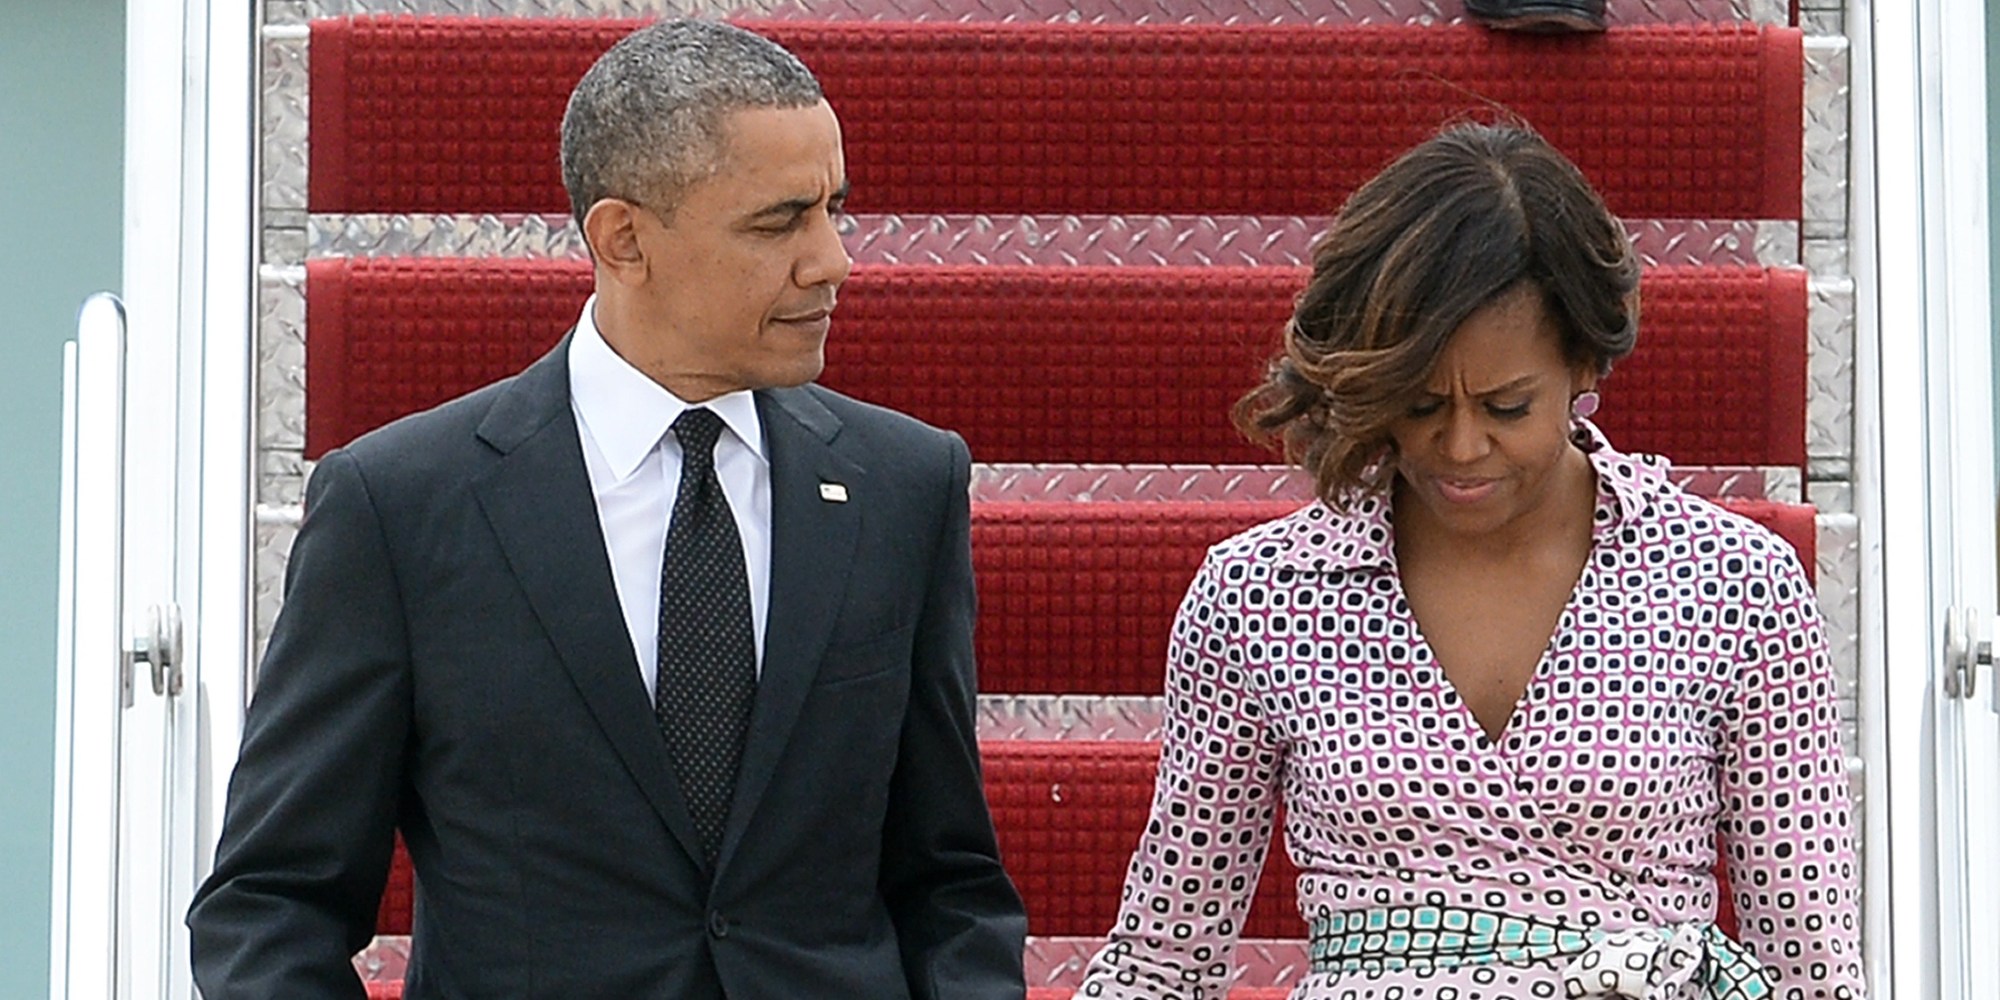 Michelle Obama Looks Really Sad Over Her Short New York Trip | HuffPost